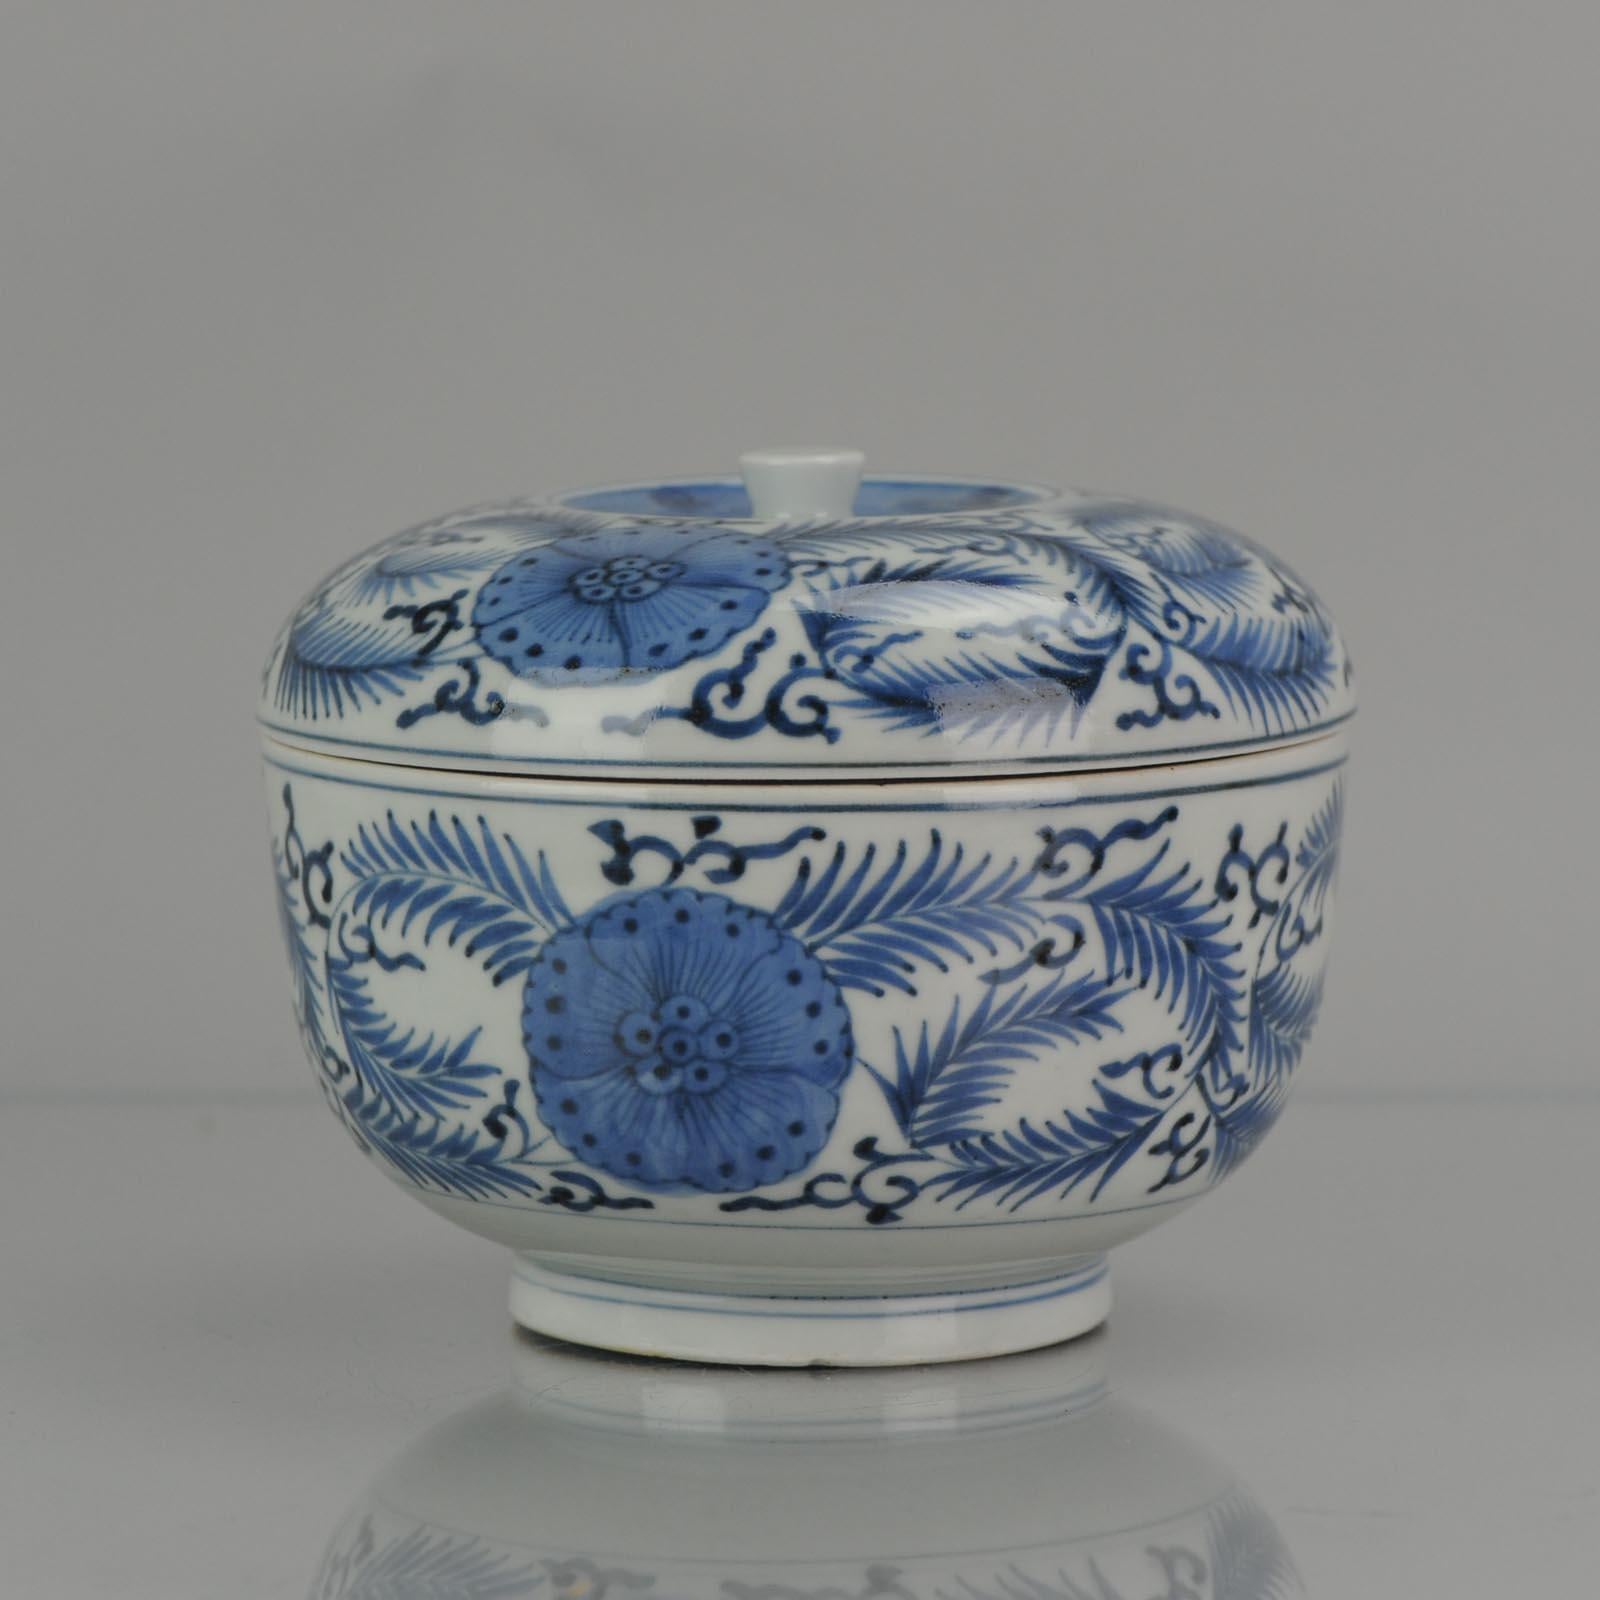 18th Century and Earlier Large Edo Period 17-18th C Japanese Porcelain Arita Bowl Flowers and Branches